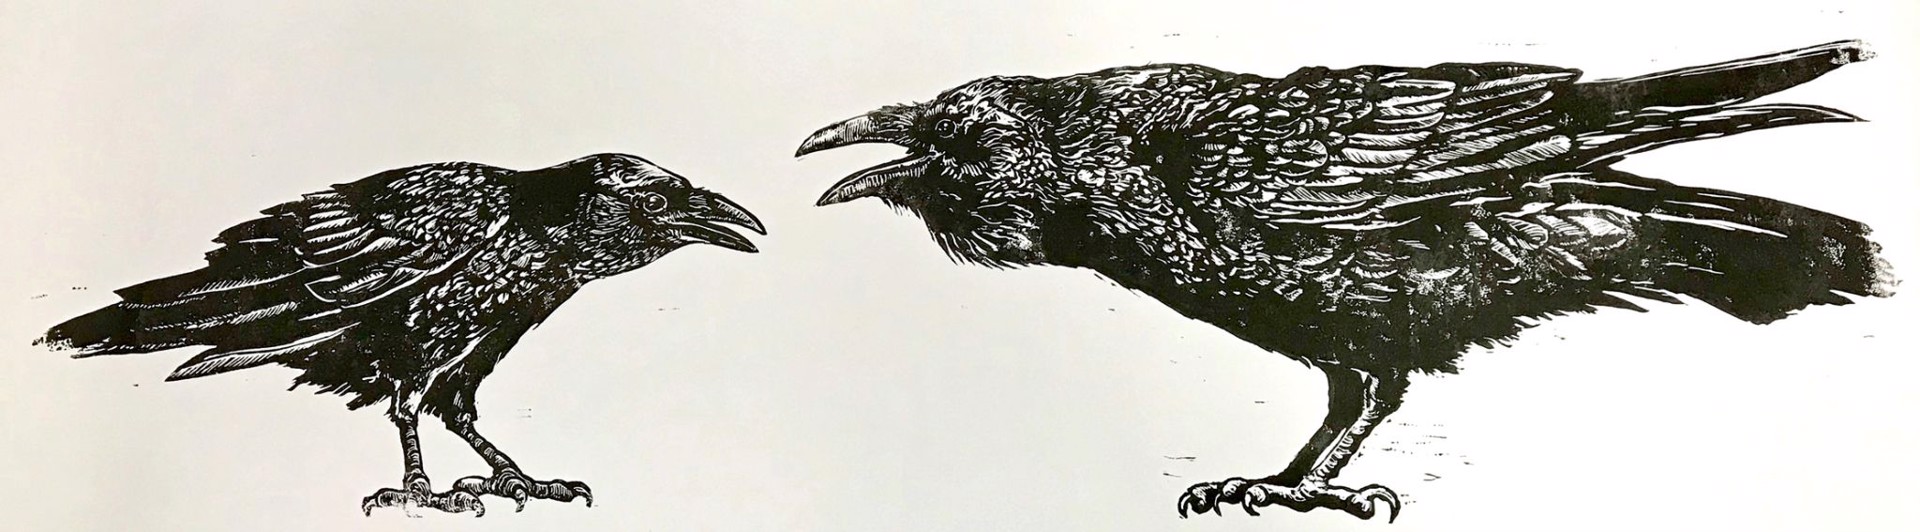 The Crow and the Raven - Don't Try to Be Something You Are Not by Larry Vienneau